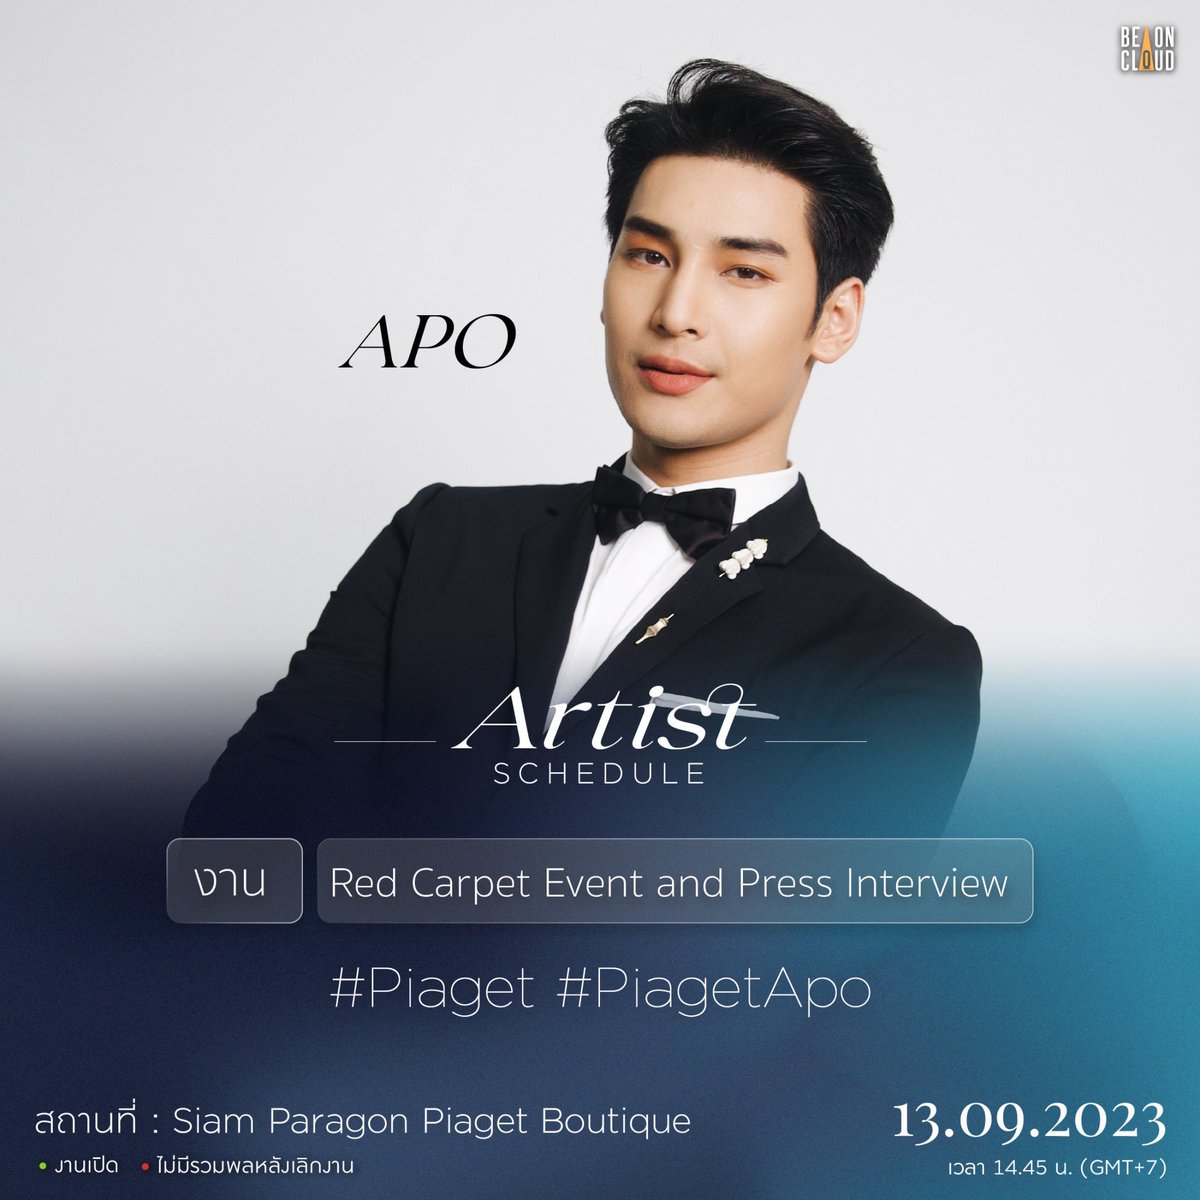 📢#apocolleagues 

Post Apo’s invite on your Instagram

Tags: @. Piaget @. siamparagonshopping
@.Piaget

HT: #MaisonOfExtraleganza #PiagetPossession 
#OwnTheMoment #Nnattawin #metaphoria #extraleganza #piaget #piagetsociety #ManSuangGala 
#แมนสรวงปฐมทัศน์ #Swisswatches #Richemont